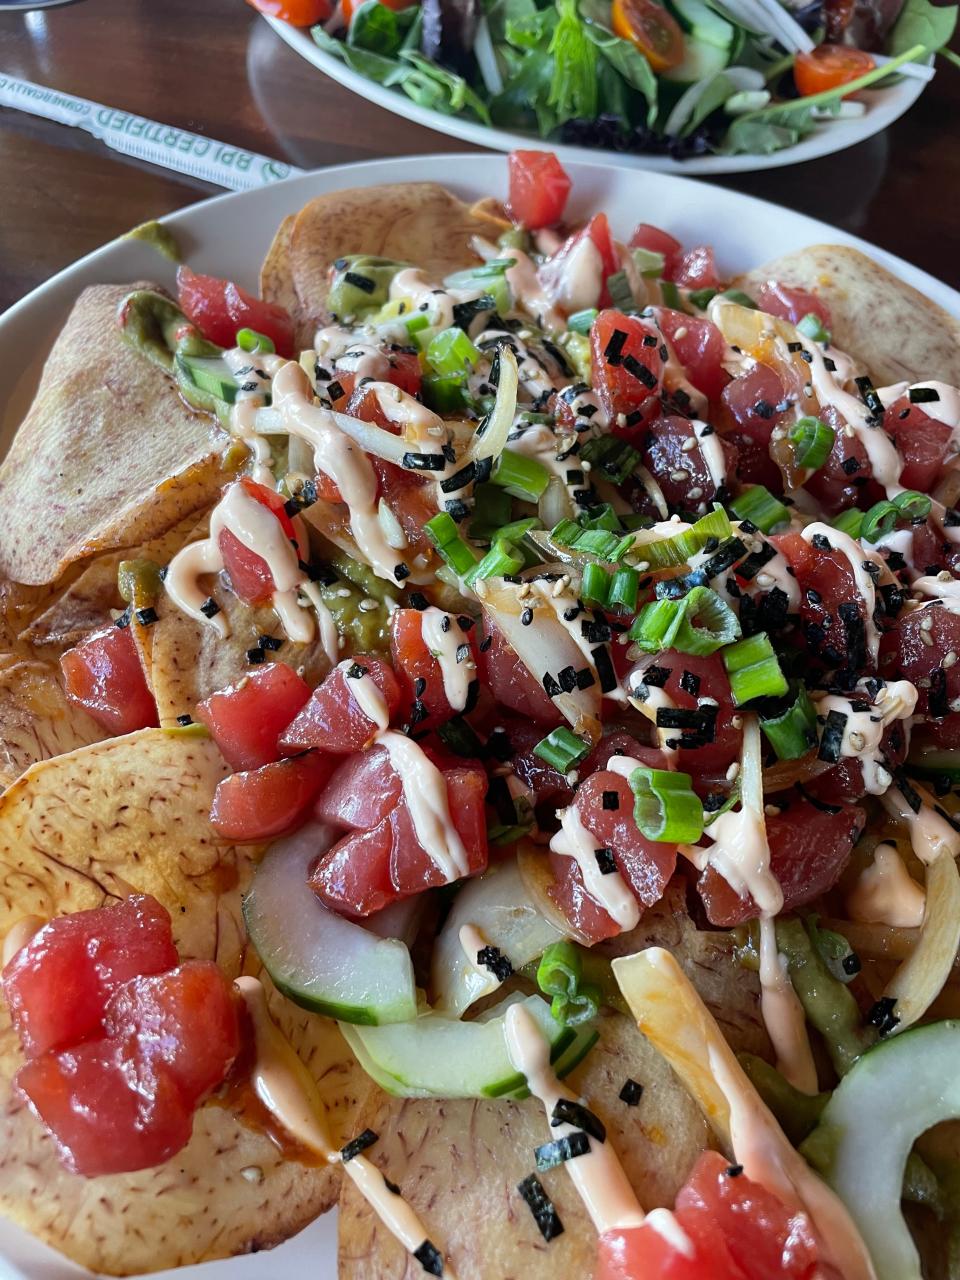 Instead of tortilla chips, the ahi poke nachos at Pounders use hand-cut taro chips, which is a root vegetable that's a staple in Hawaiian cuisine.